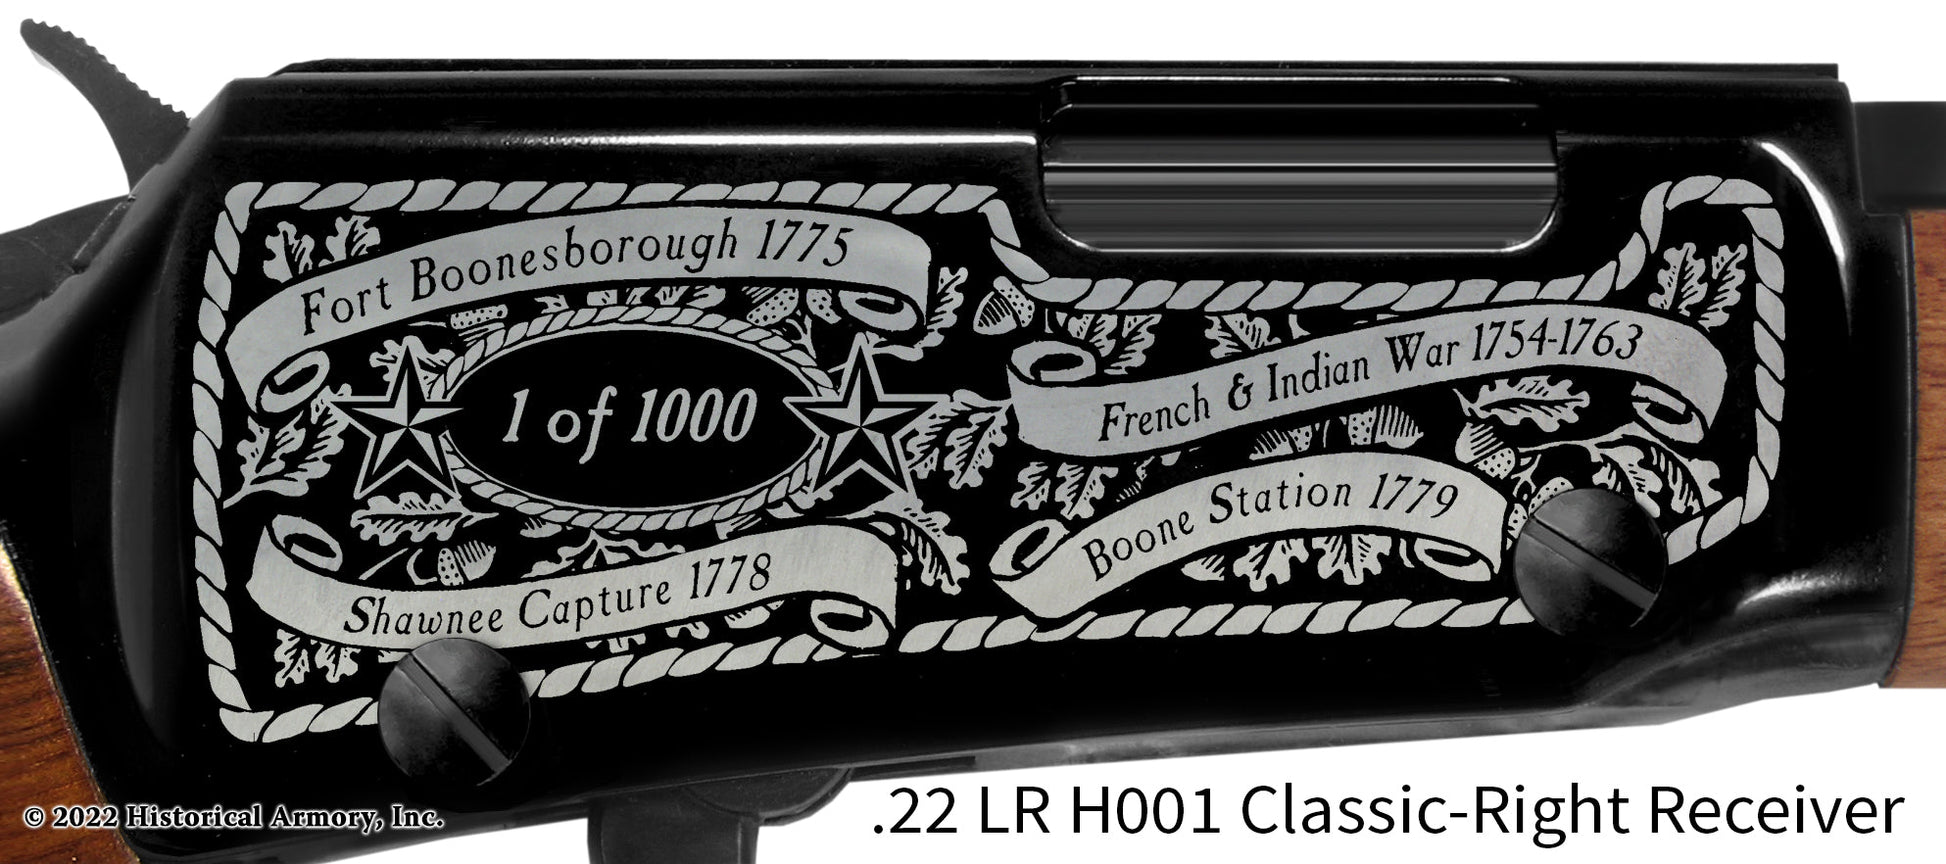 Daniel Boone Limited Edition Engraved Rifle